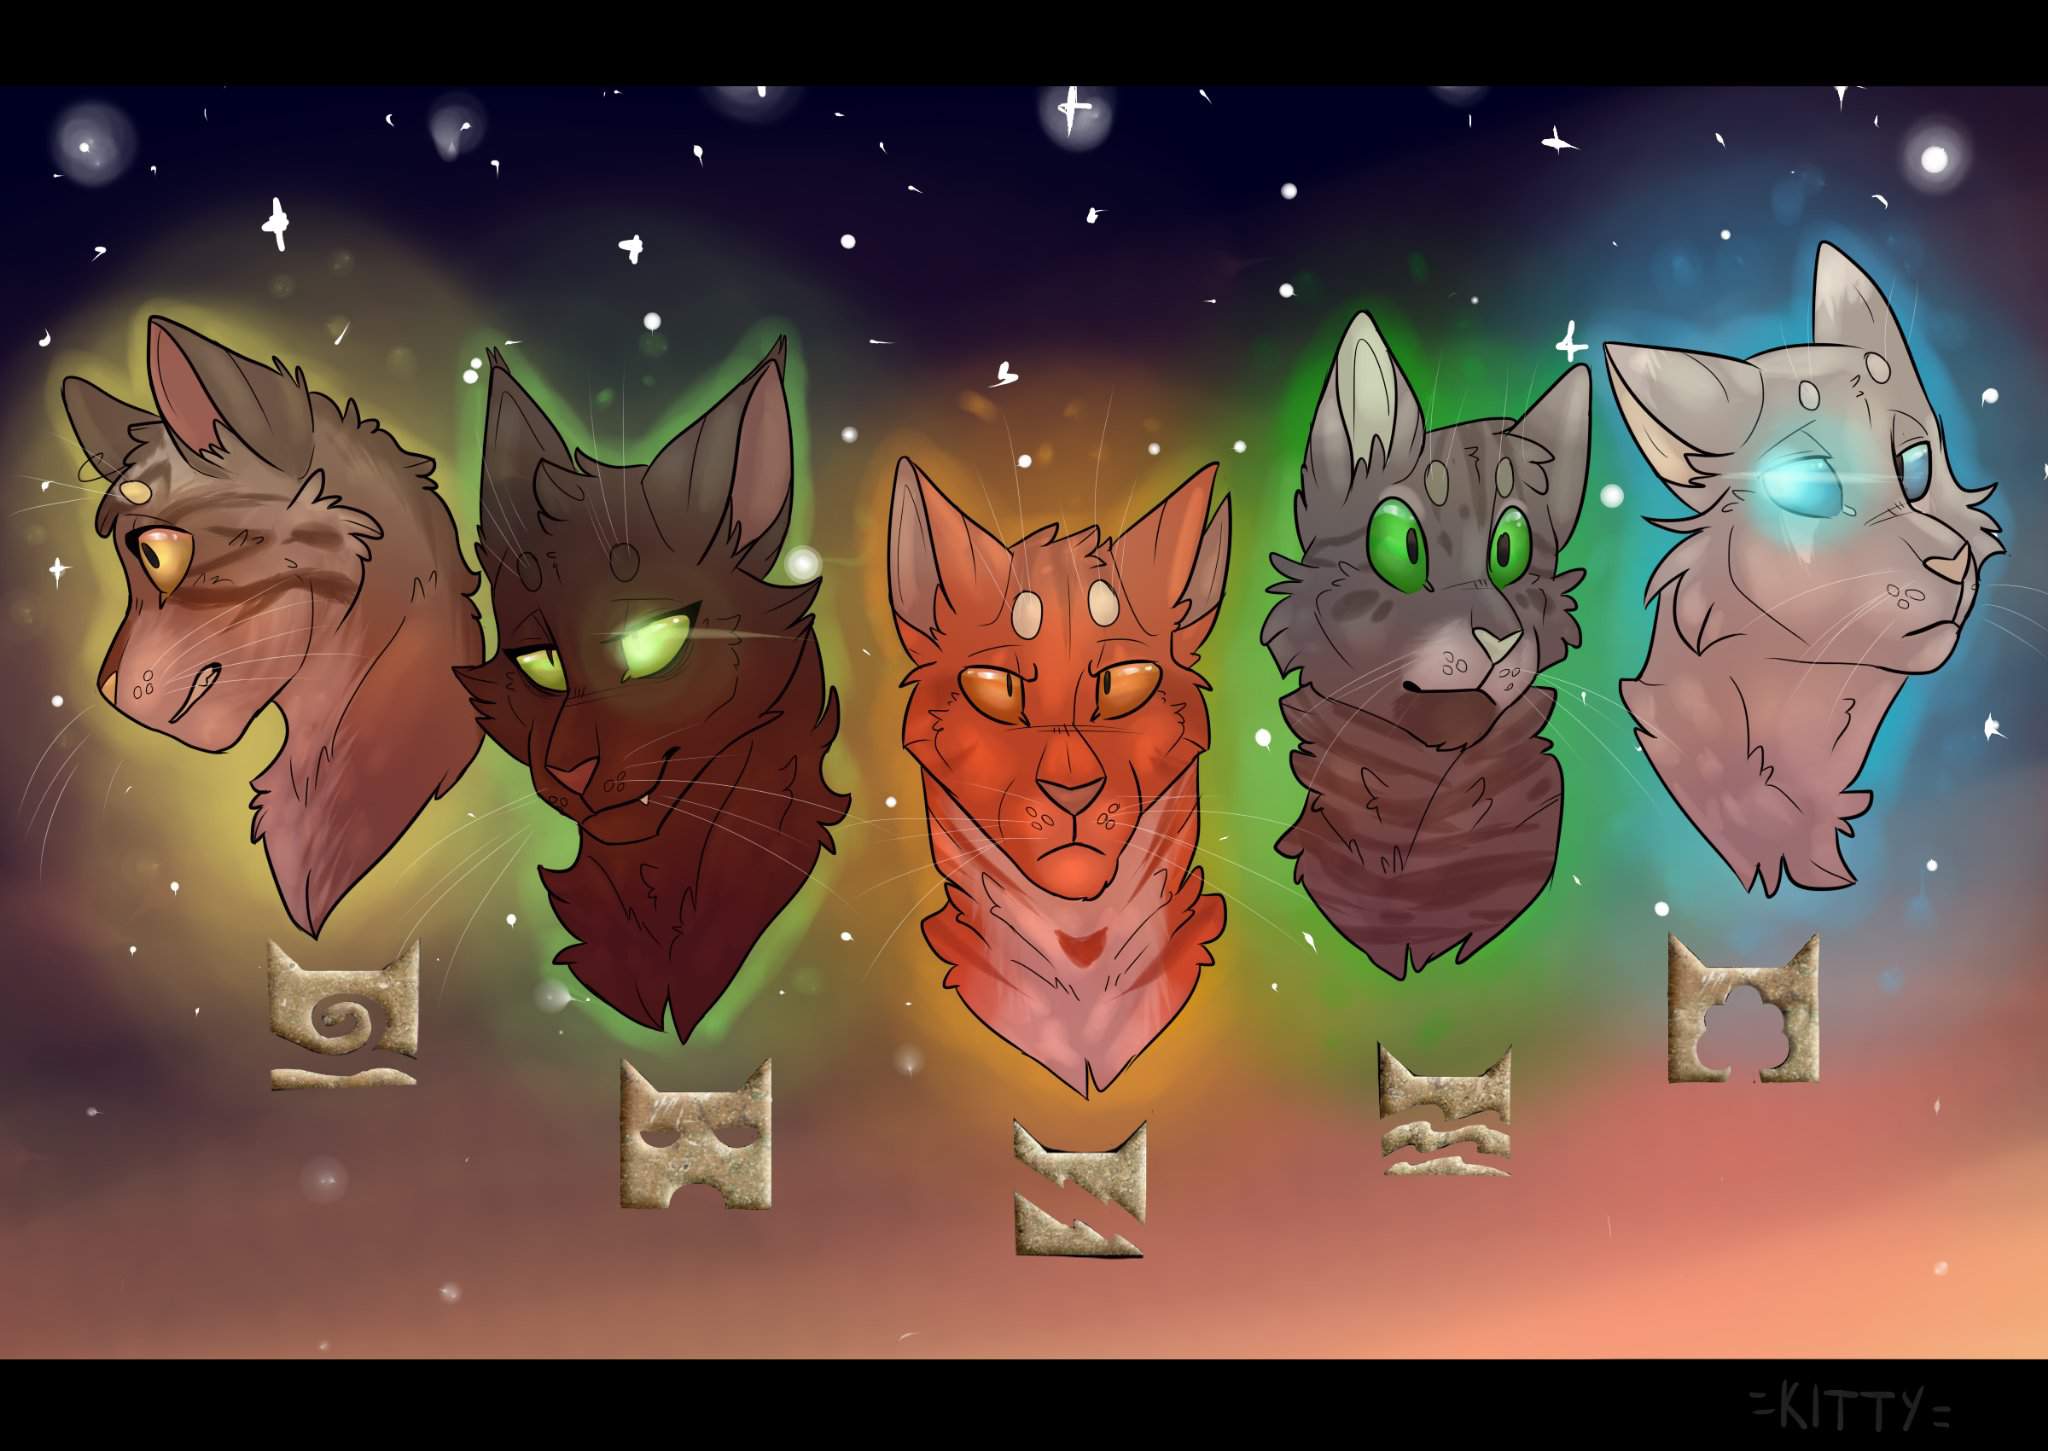 Do you think you know the Warrior Cats family tree well? 